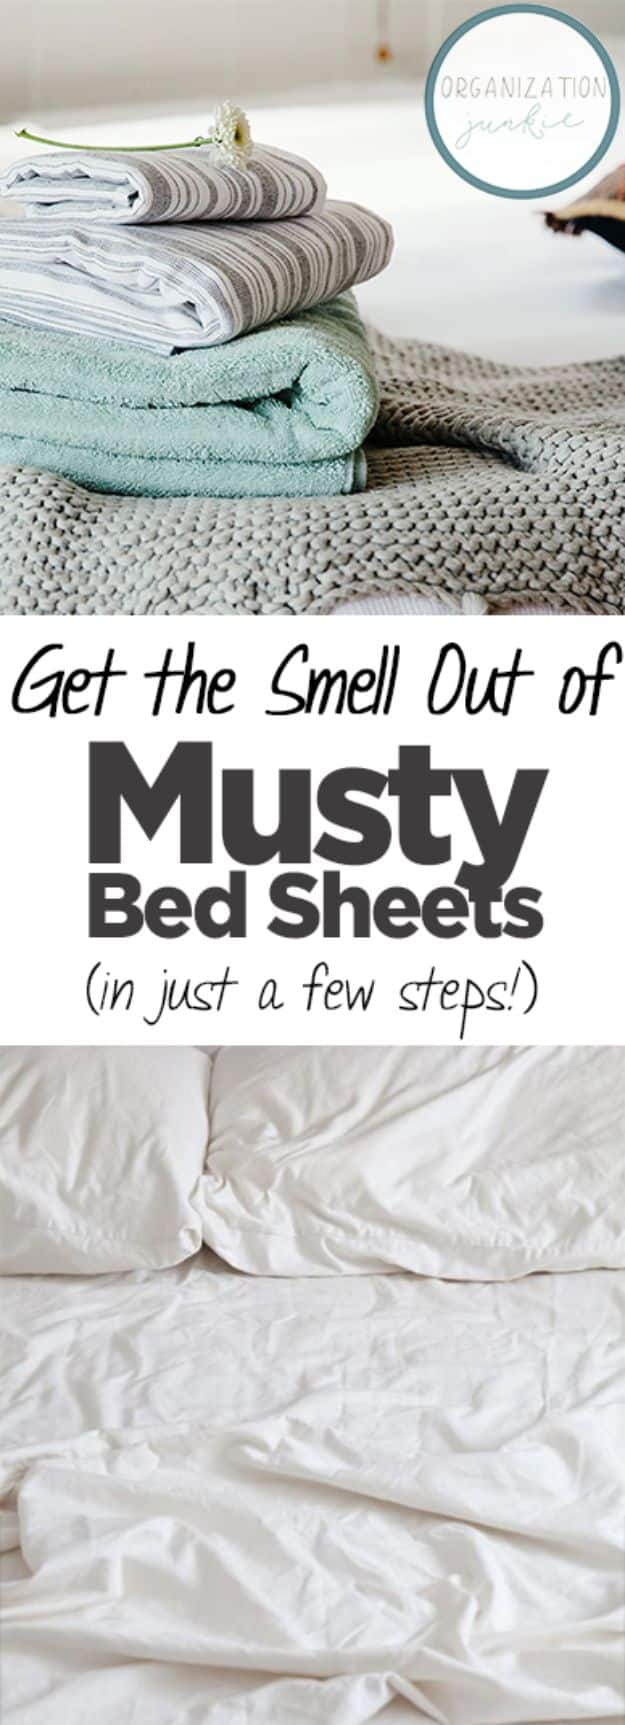 Laundry Hacks - Get the Smell Out of Musty Bed Sheets - Cool Tips for Busy Moms and Laundry Lifehacks - Laundry Room Organizing Ideas, Storage and Makeover - Folding, Drying, Cleaning and Stain Removal Tips for Clothes - How to Remove Stains, Paint, Ink and Smells - Whitening Tricks and Solutions - DIY Products and Recipes for Clothing Soaps 